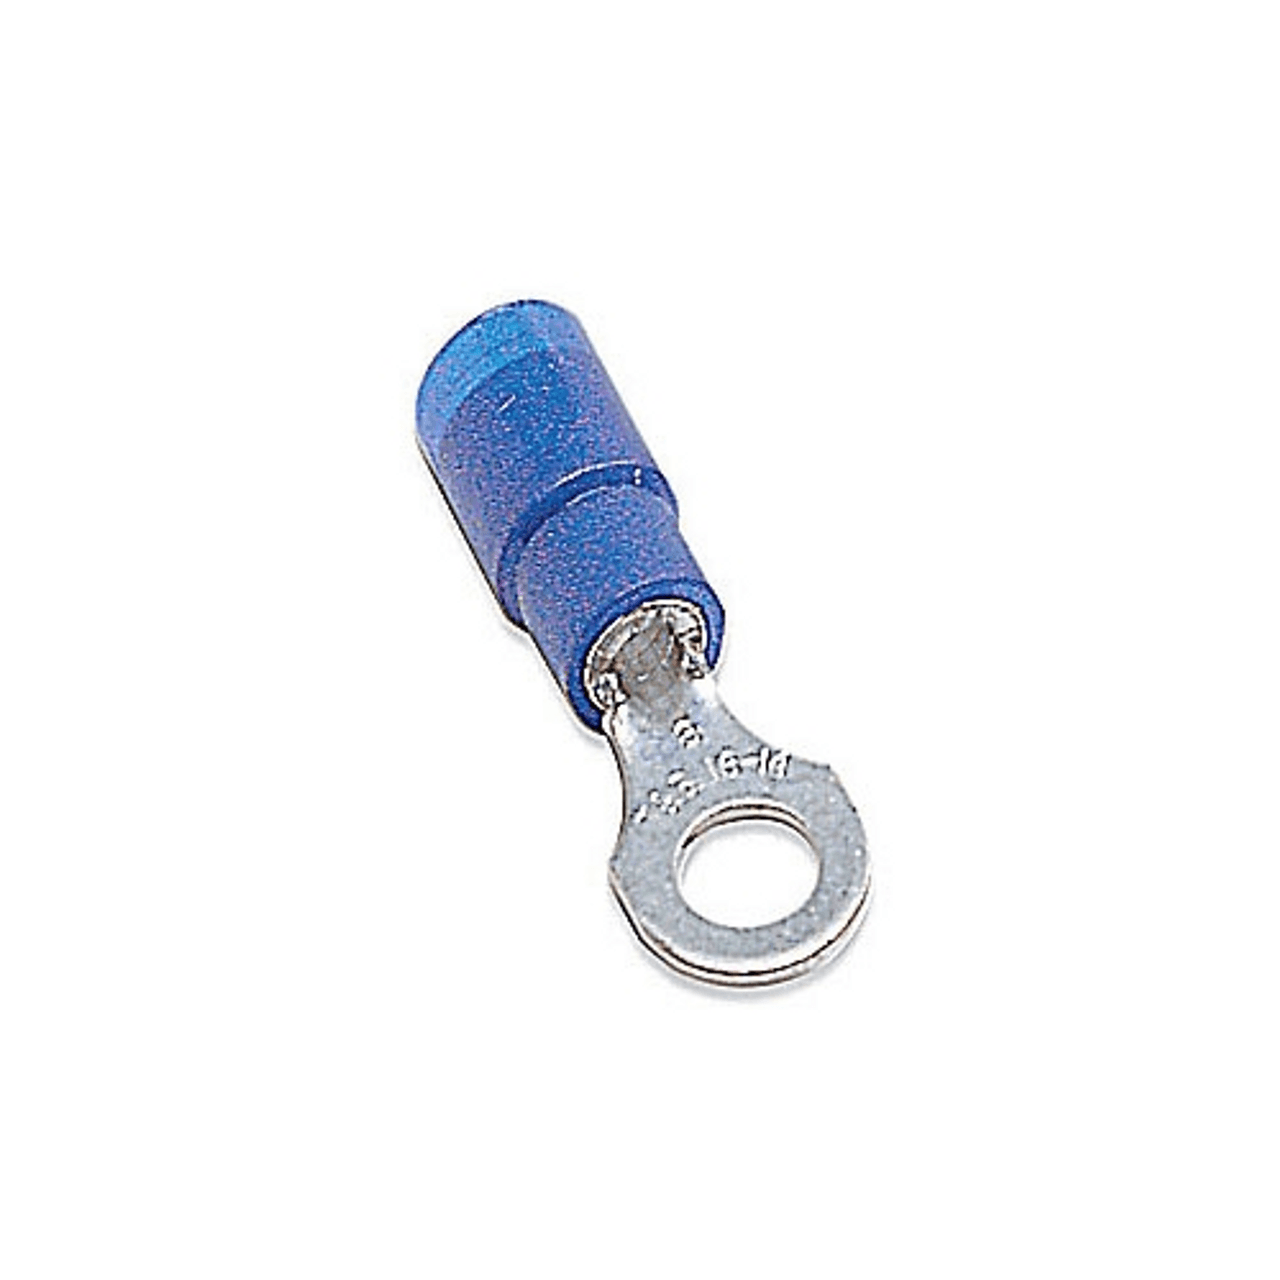 Thomas & Betts RB14-4 18 to 14 AWG, #4 Stud, 600 V, Blue, Tin Plated Copper, Nylon Insulated, Electrical